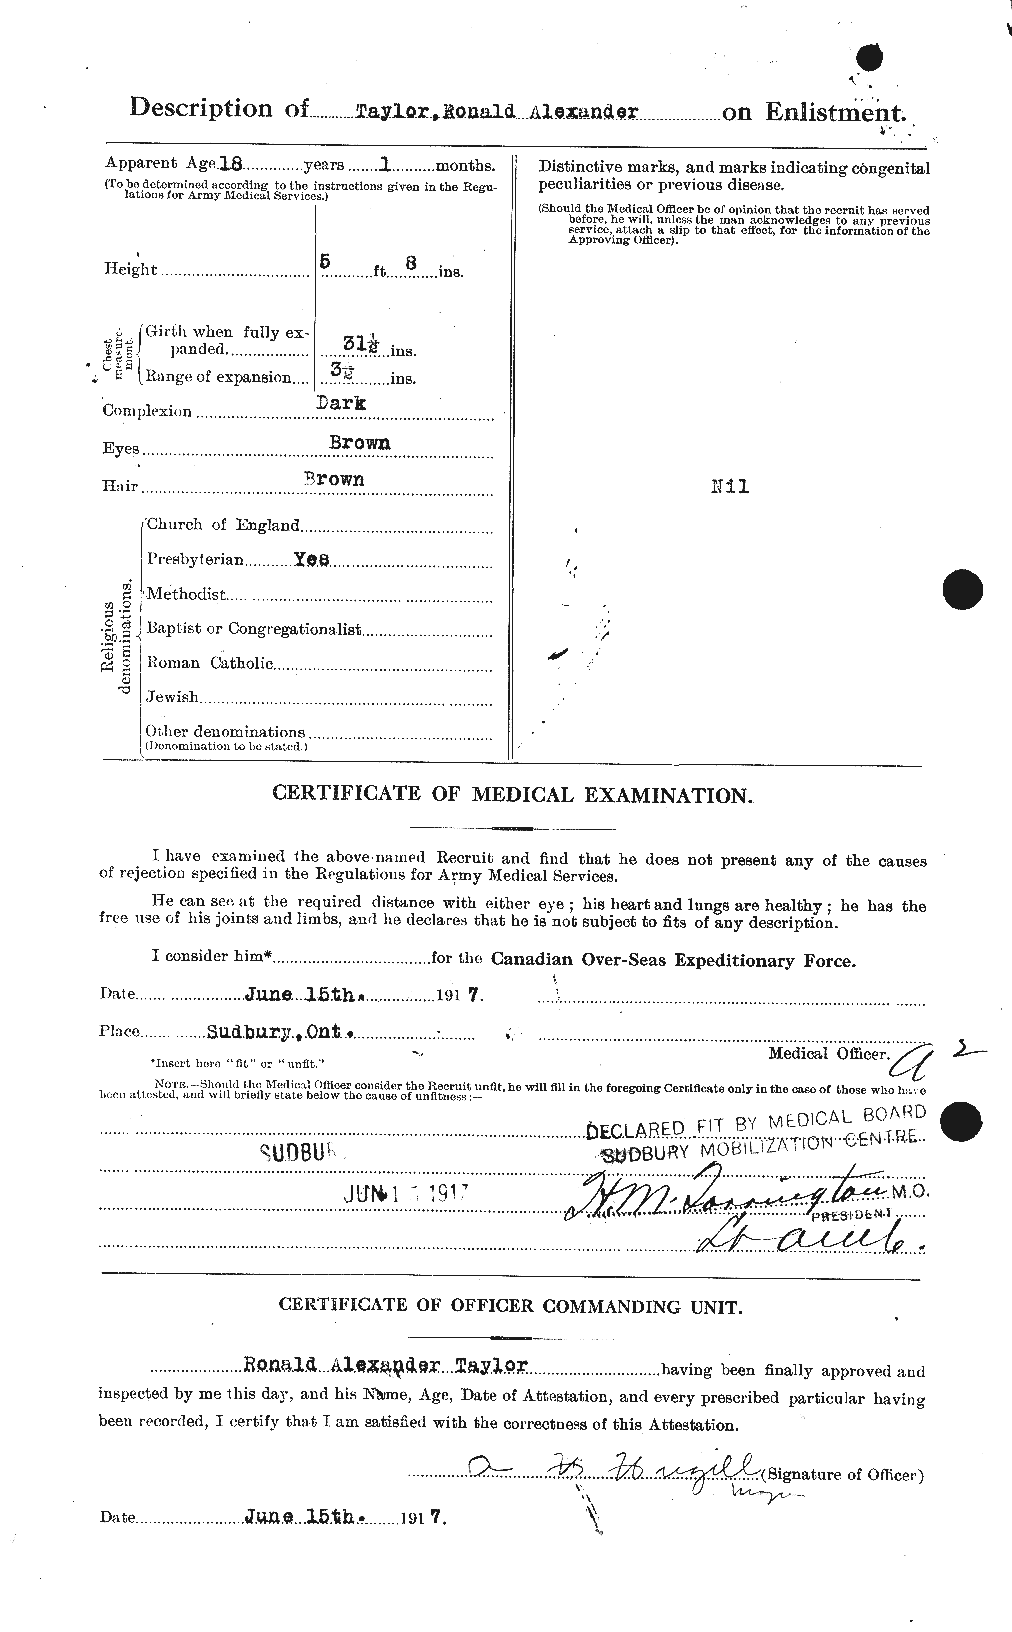 Personnel Records of the First World War - CEF 627508b